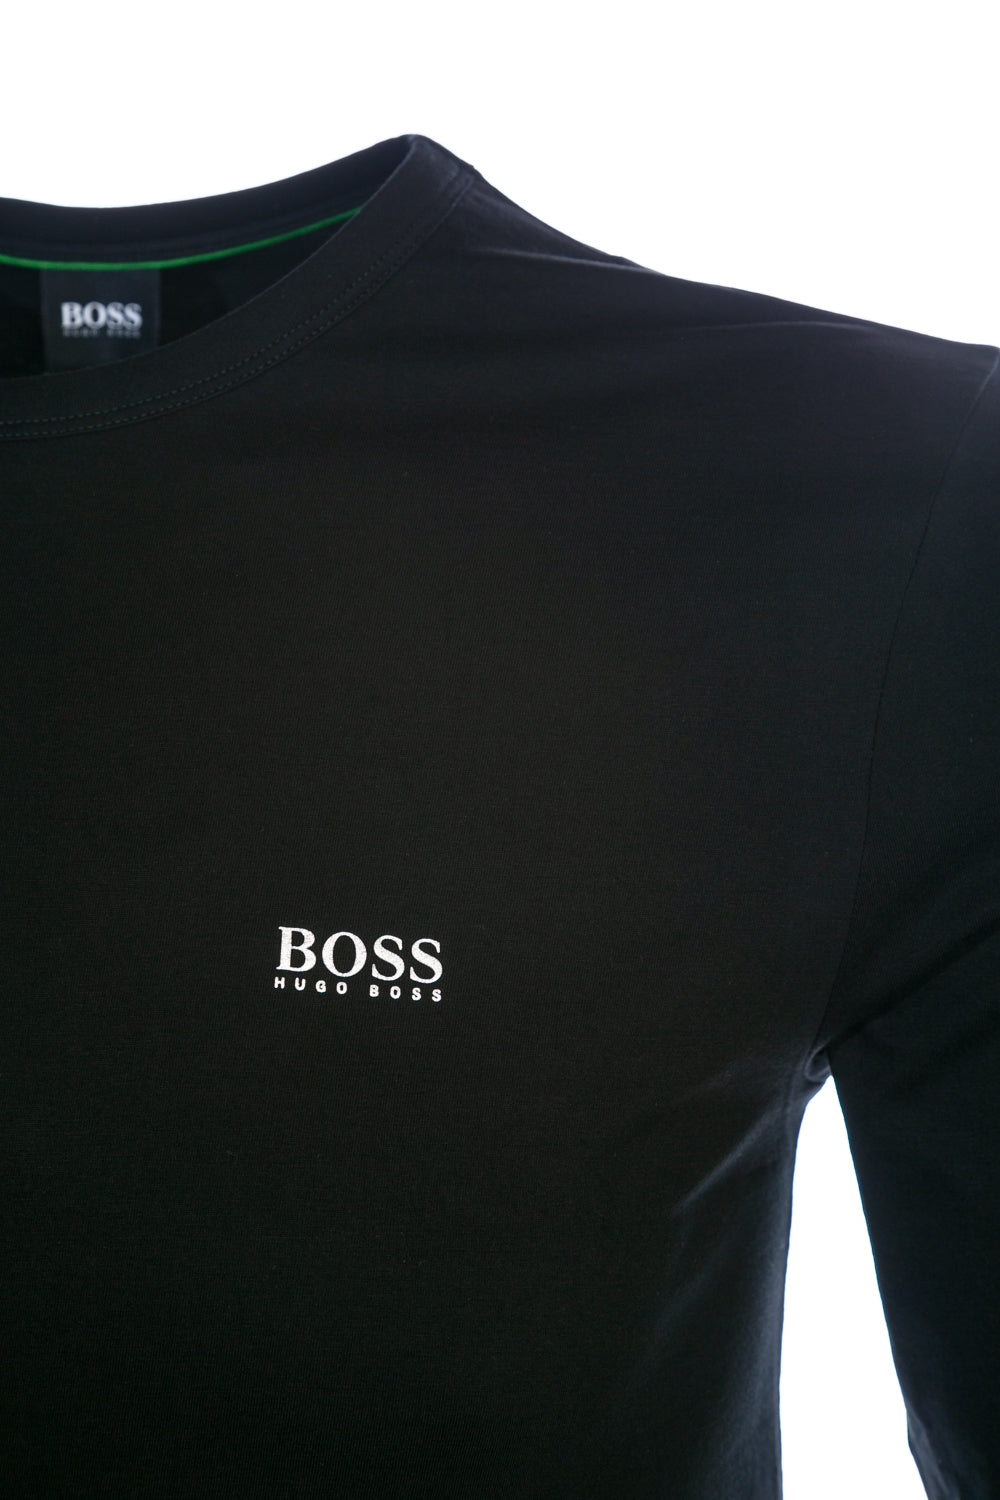 BOSS Togn Long Sleeve T Shirt in Black & Silver